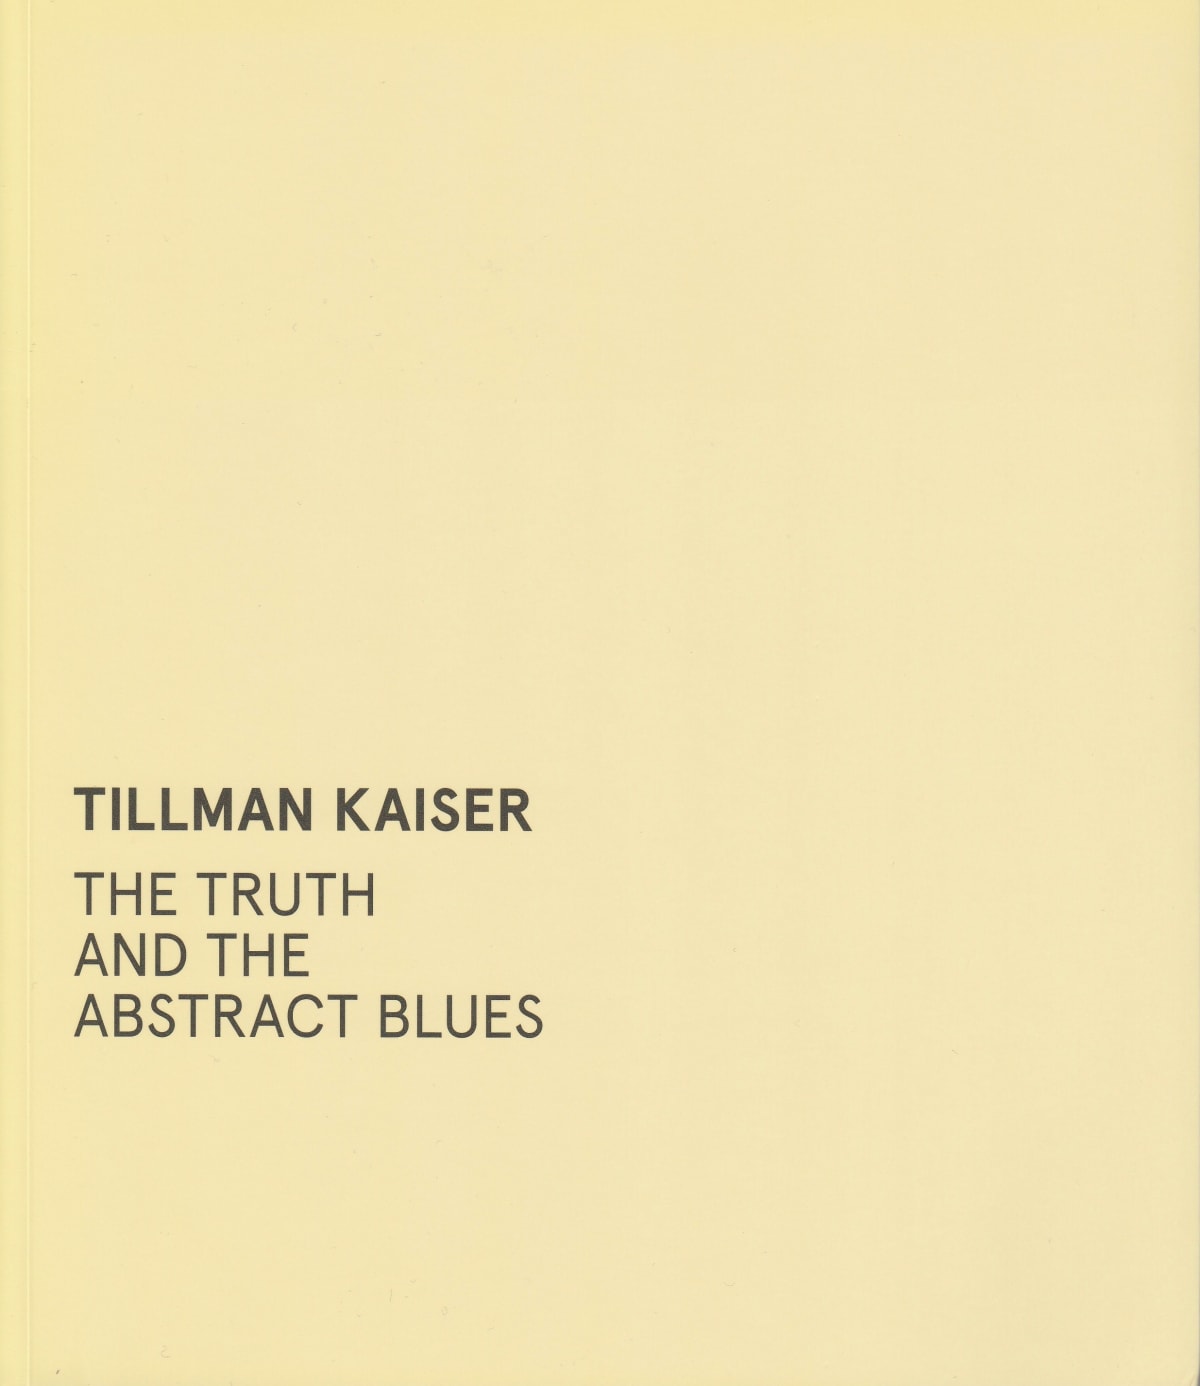 Tillman Kaiser - The Truth and The Abstract Blues